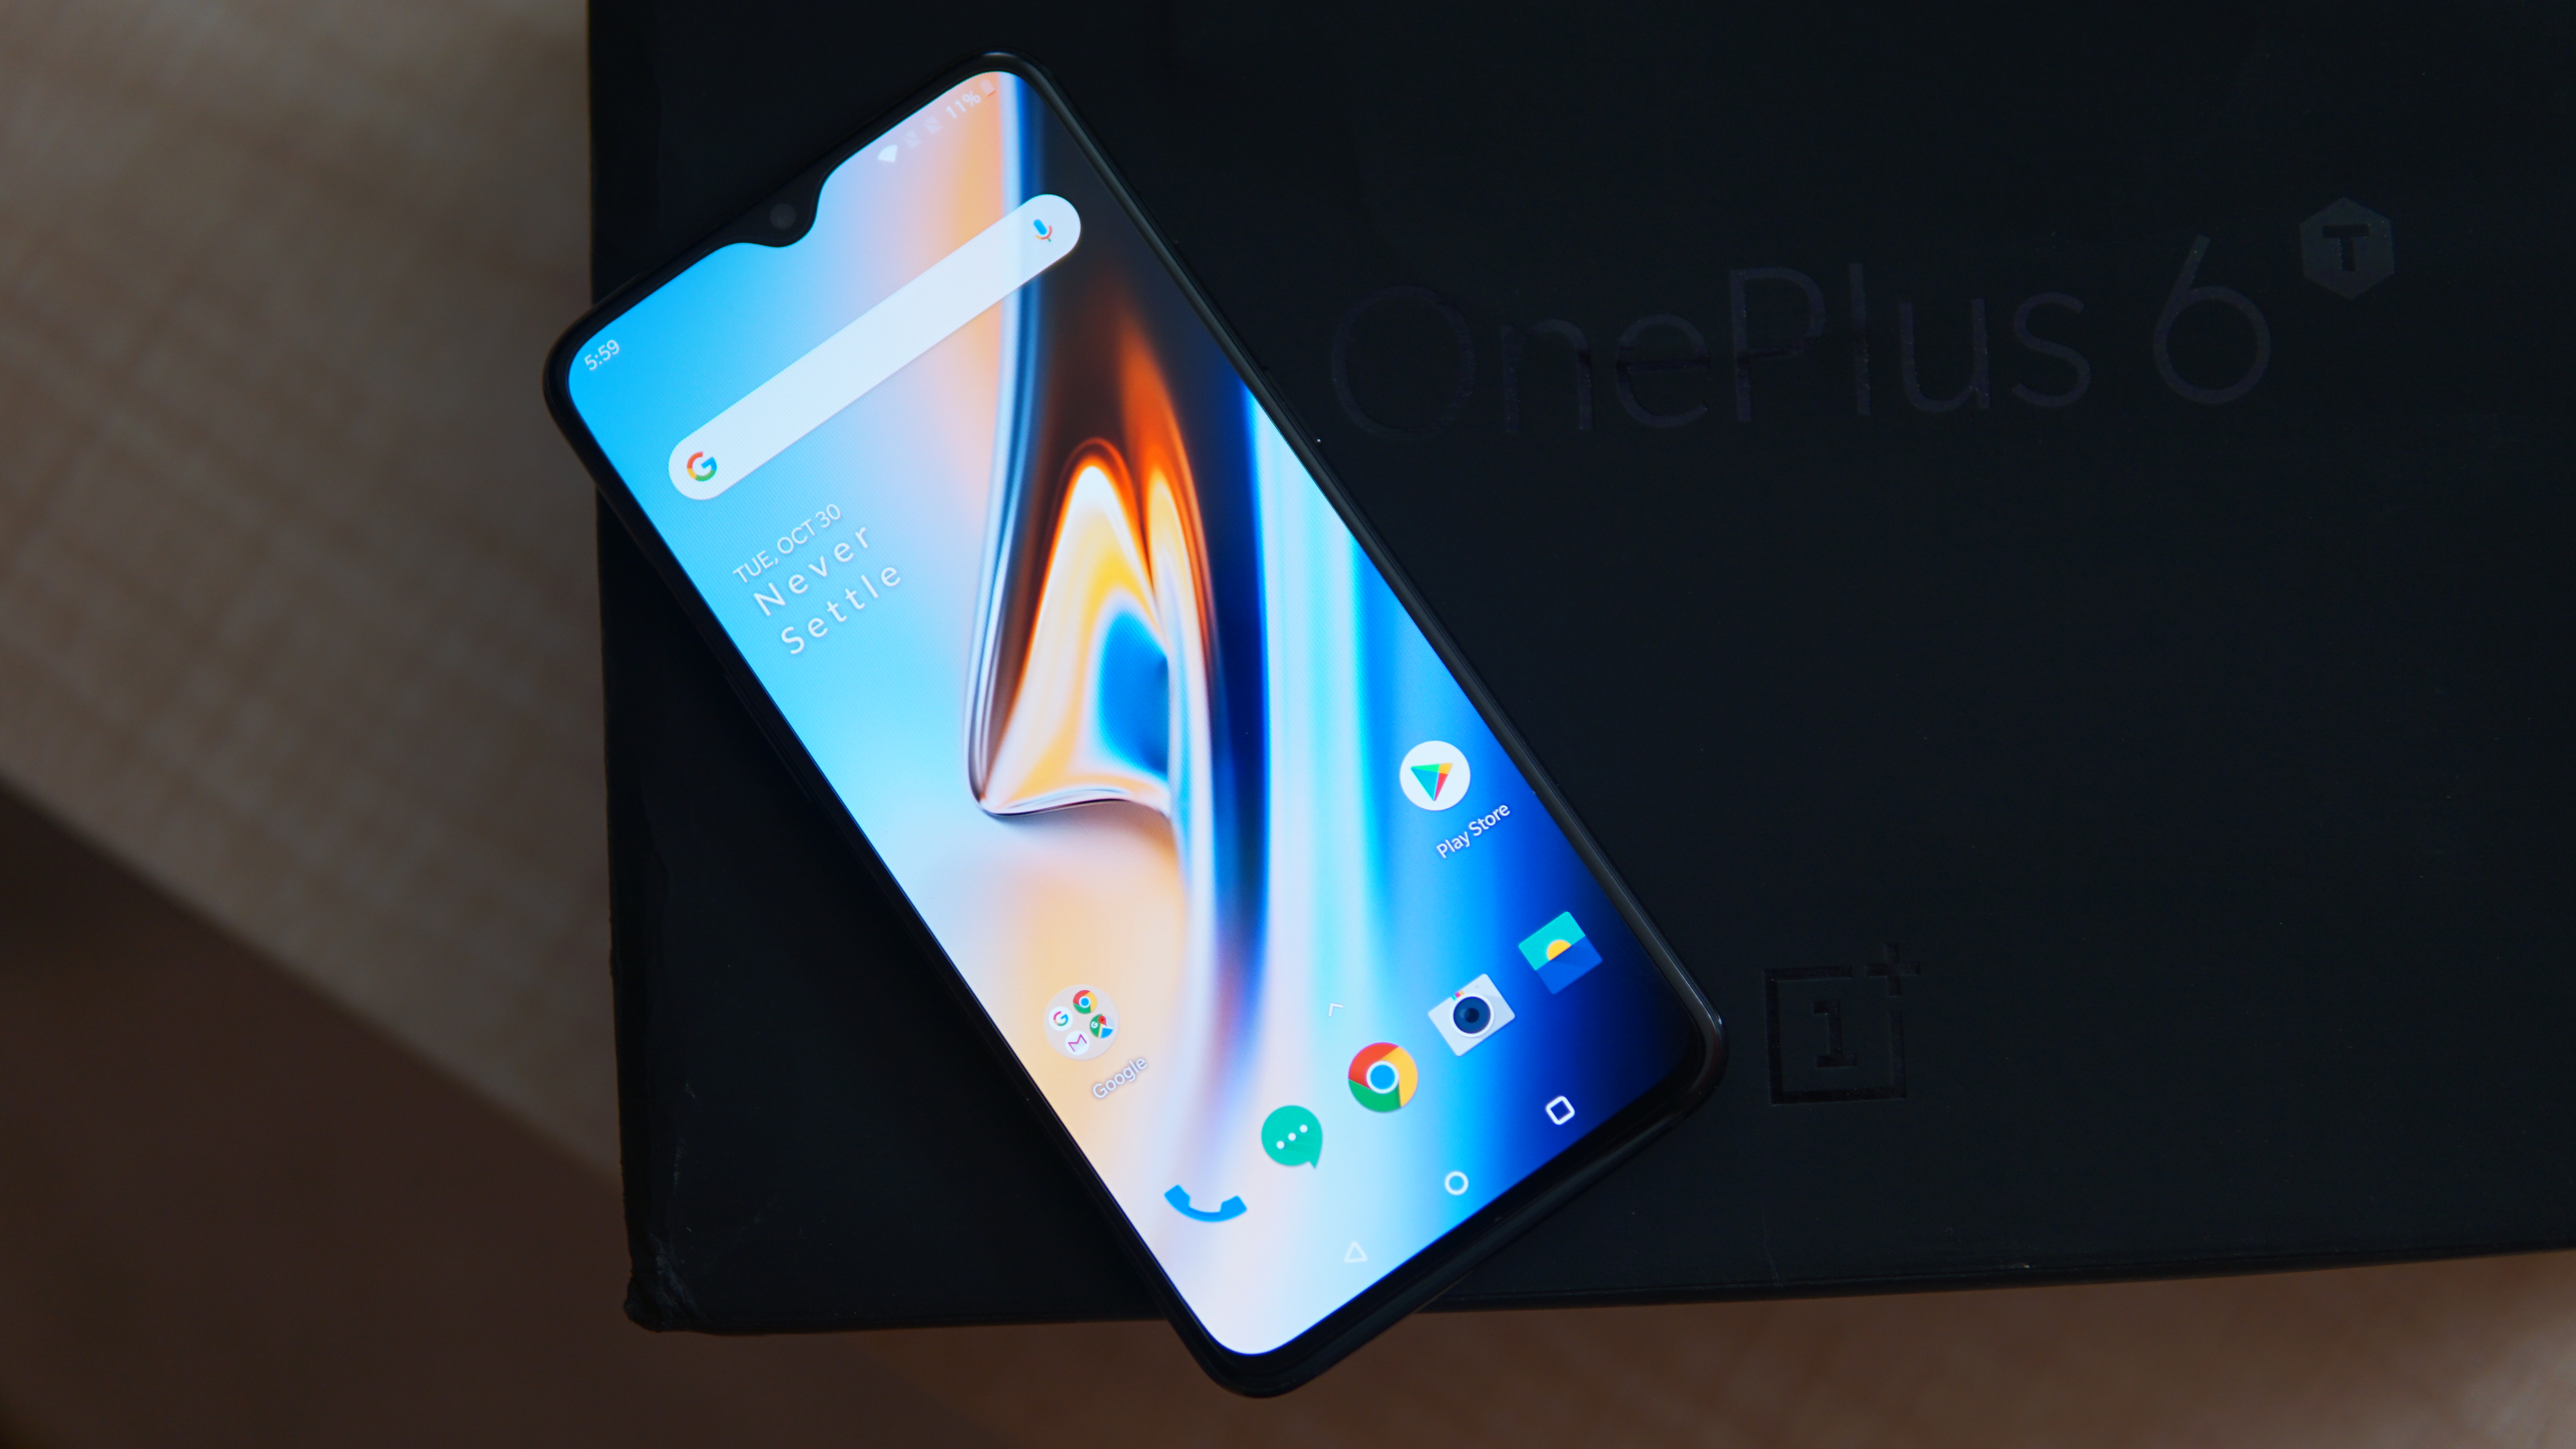 OnePlus 6T display is cool